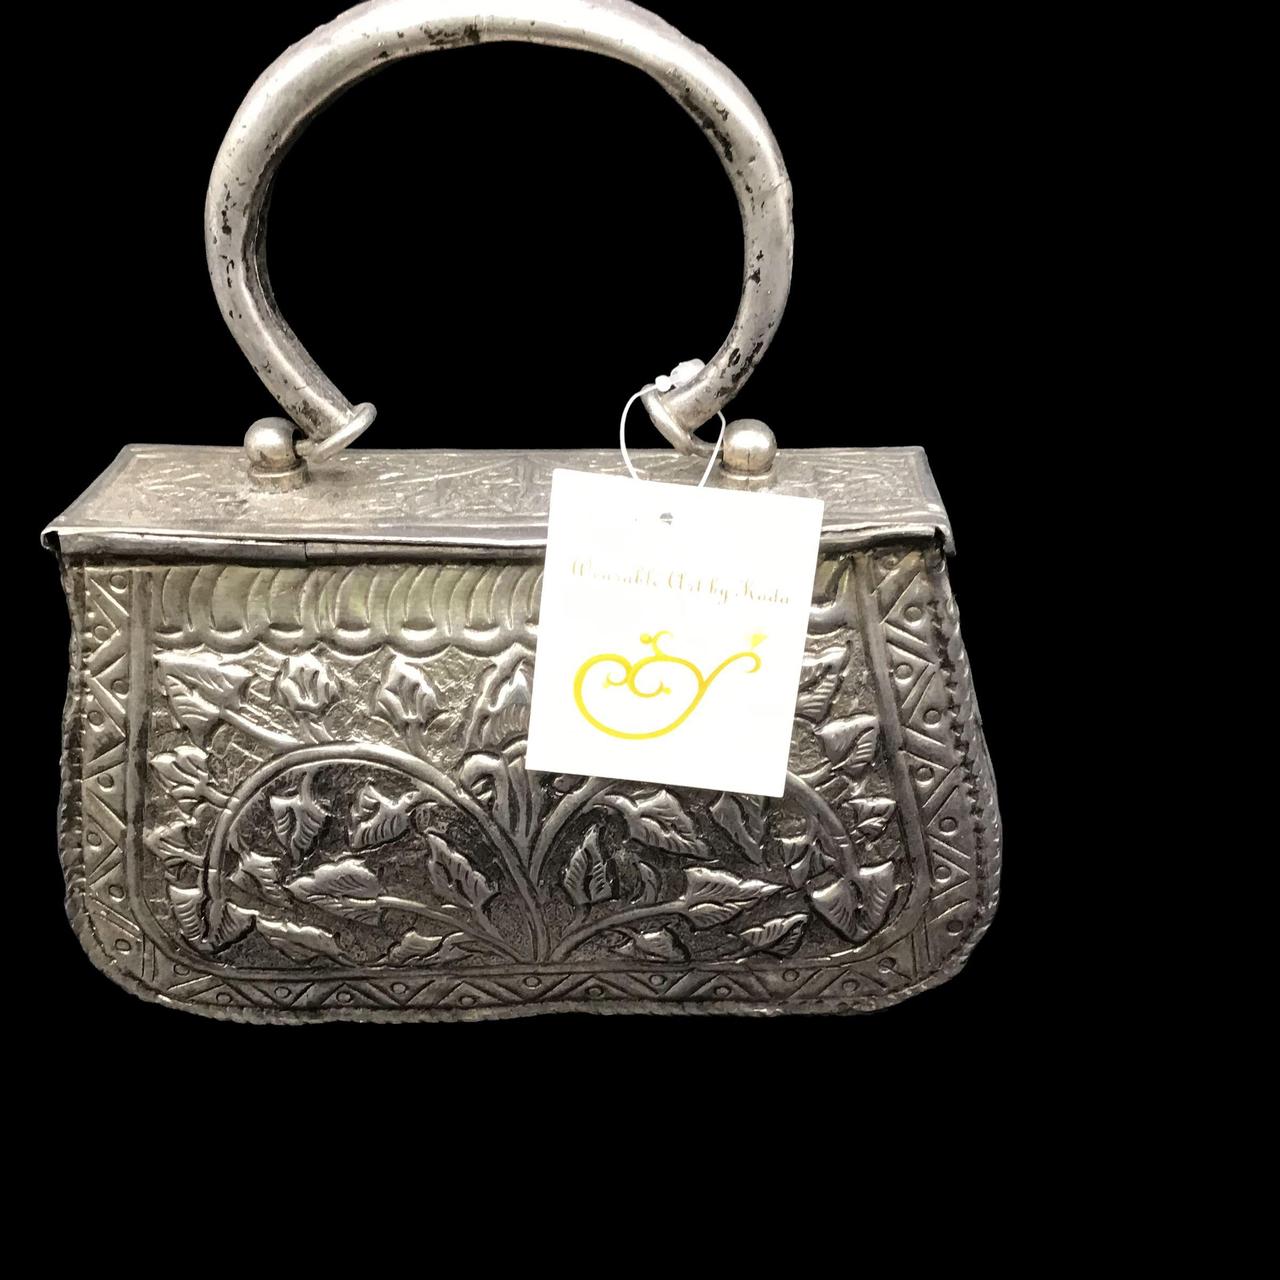 Product Image 3 - Metal Purse Hand Crafted Decorative